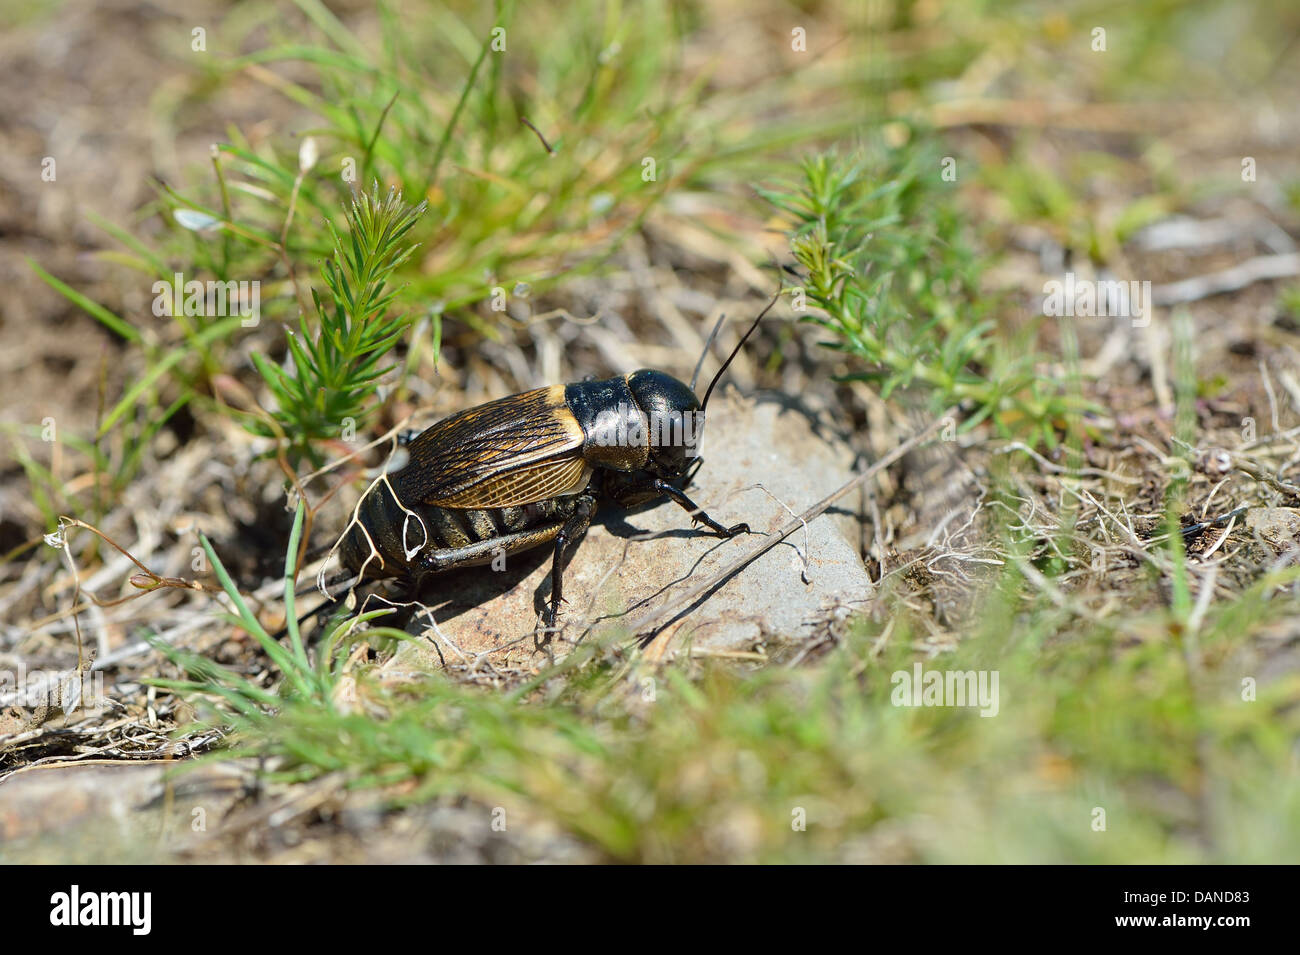 Field Cricket (Gryllus campestris) endangered species declining and red-listed in many countries of Europe Stock Photo